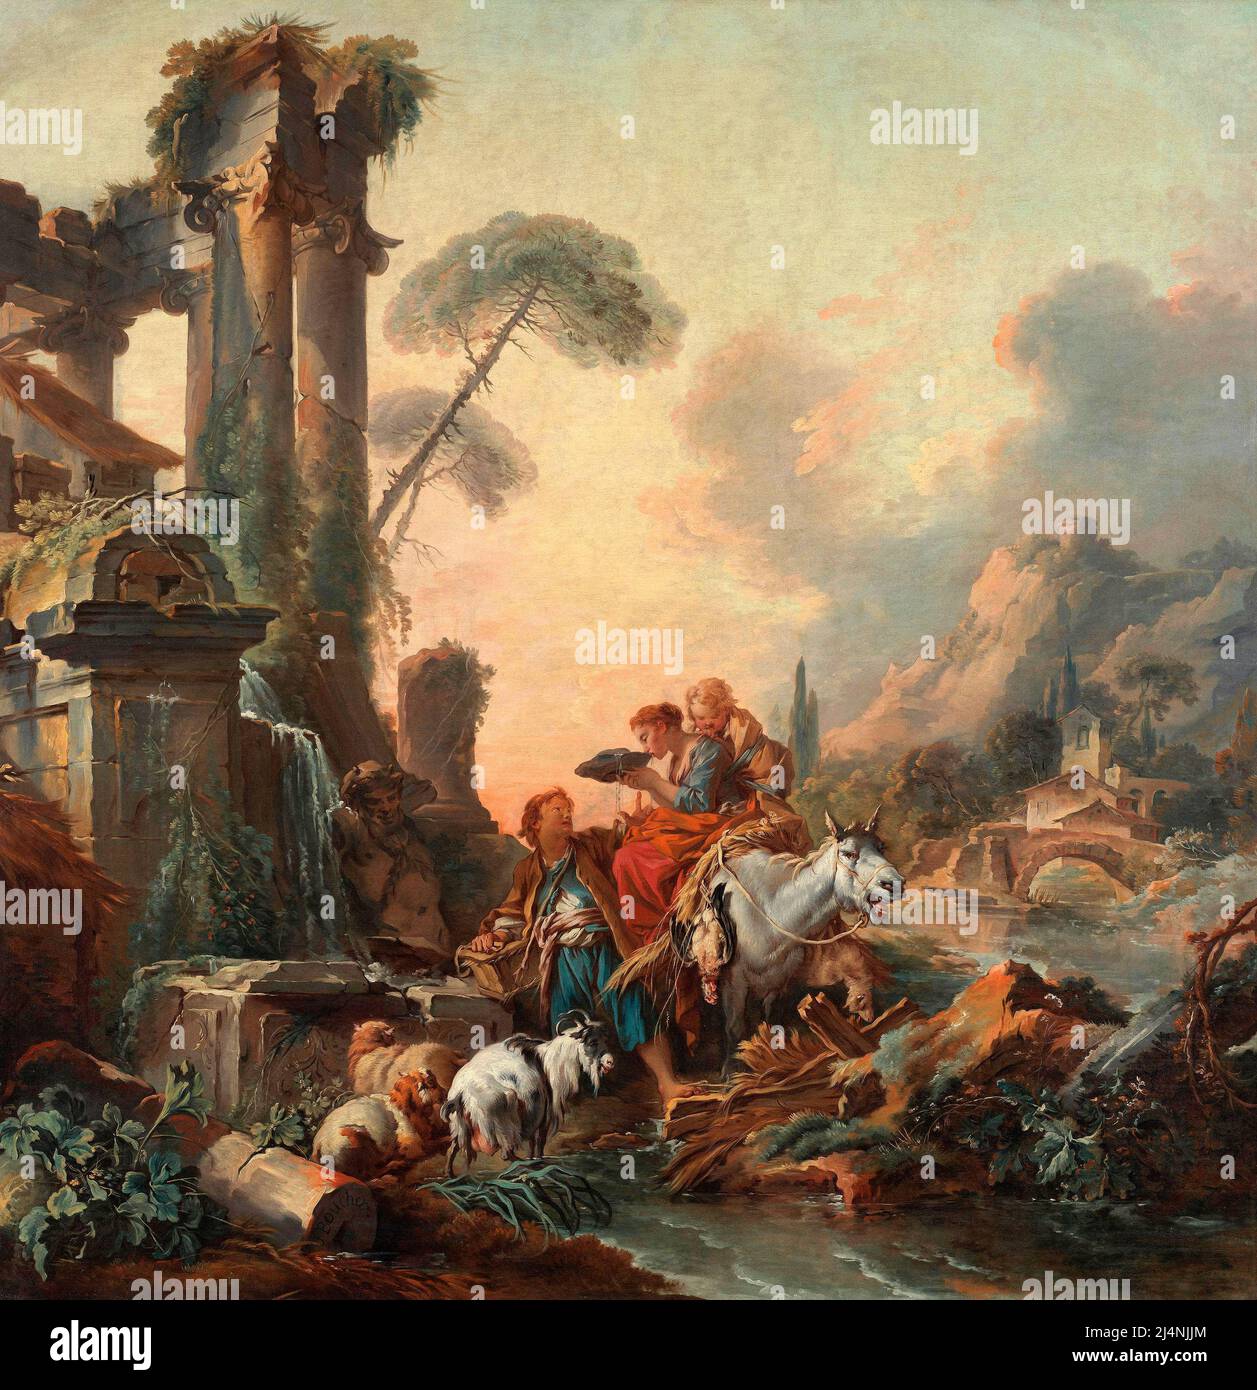 Rest at the well by François Boucher 1735 Stock Photo